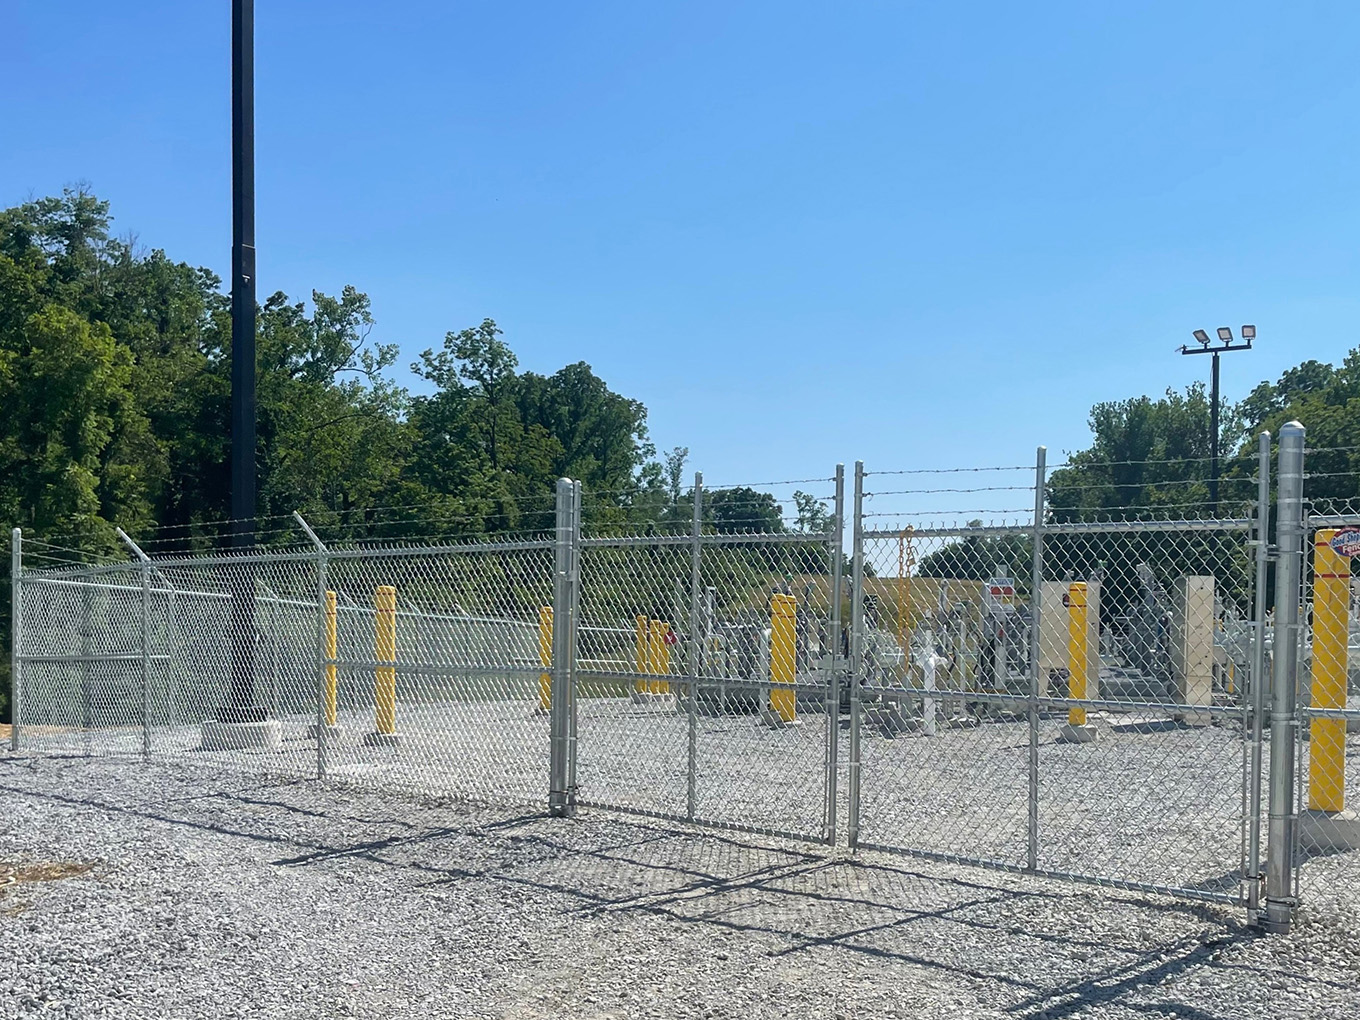 Commercial fencing service in Indianapolis, Indiana